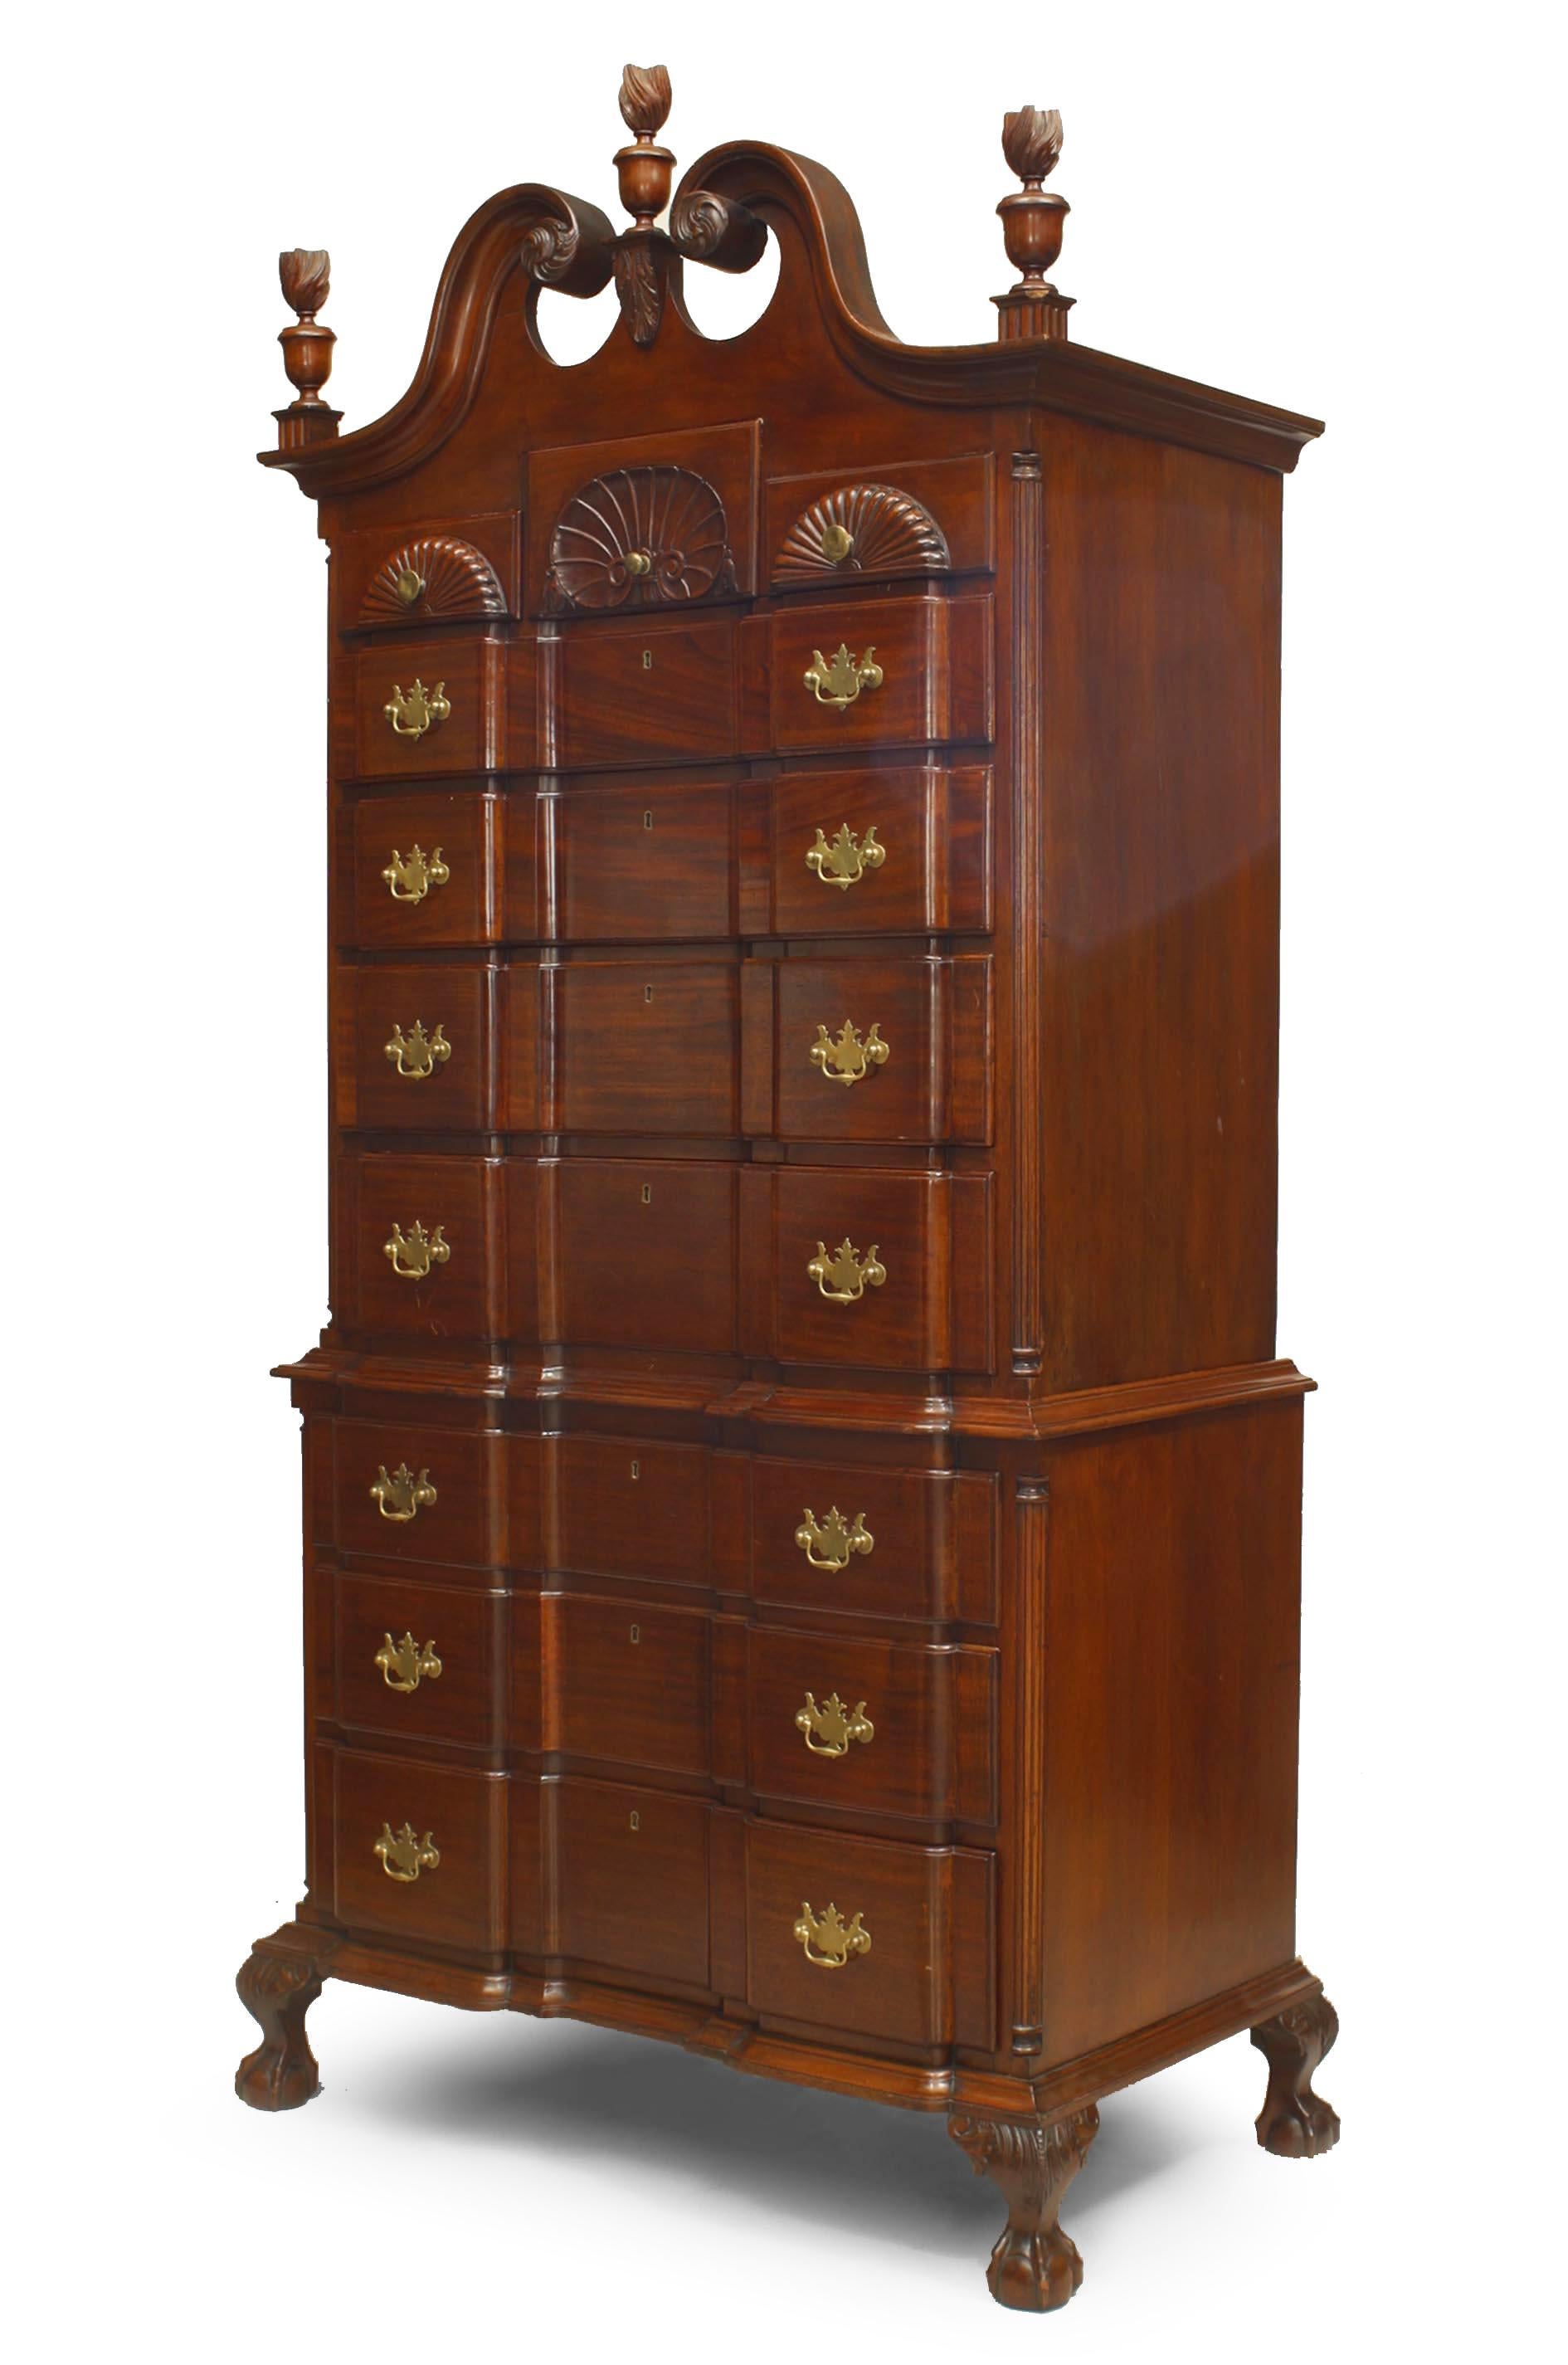 American Chippendale style mahogany chest on chest cabinet with 7 drawers below 3 shell carved small drawers with flame form finials and broken pediment top (Early 20th century).